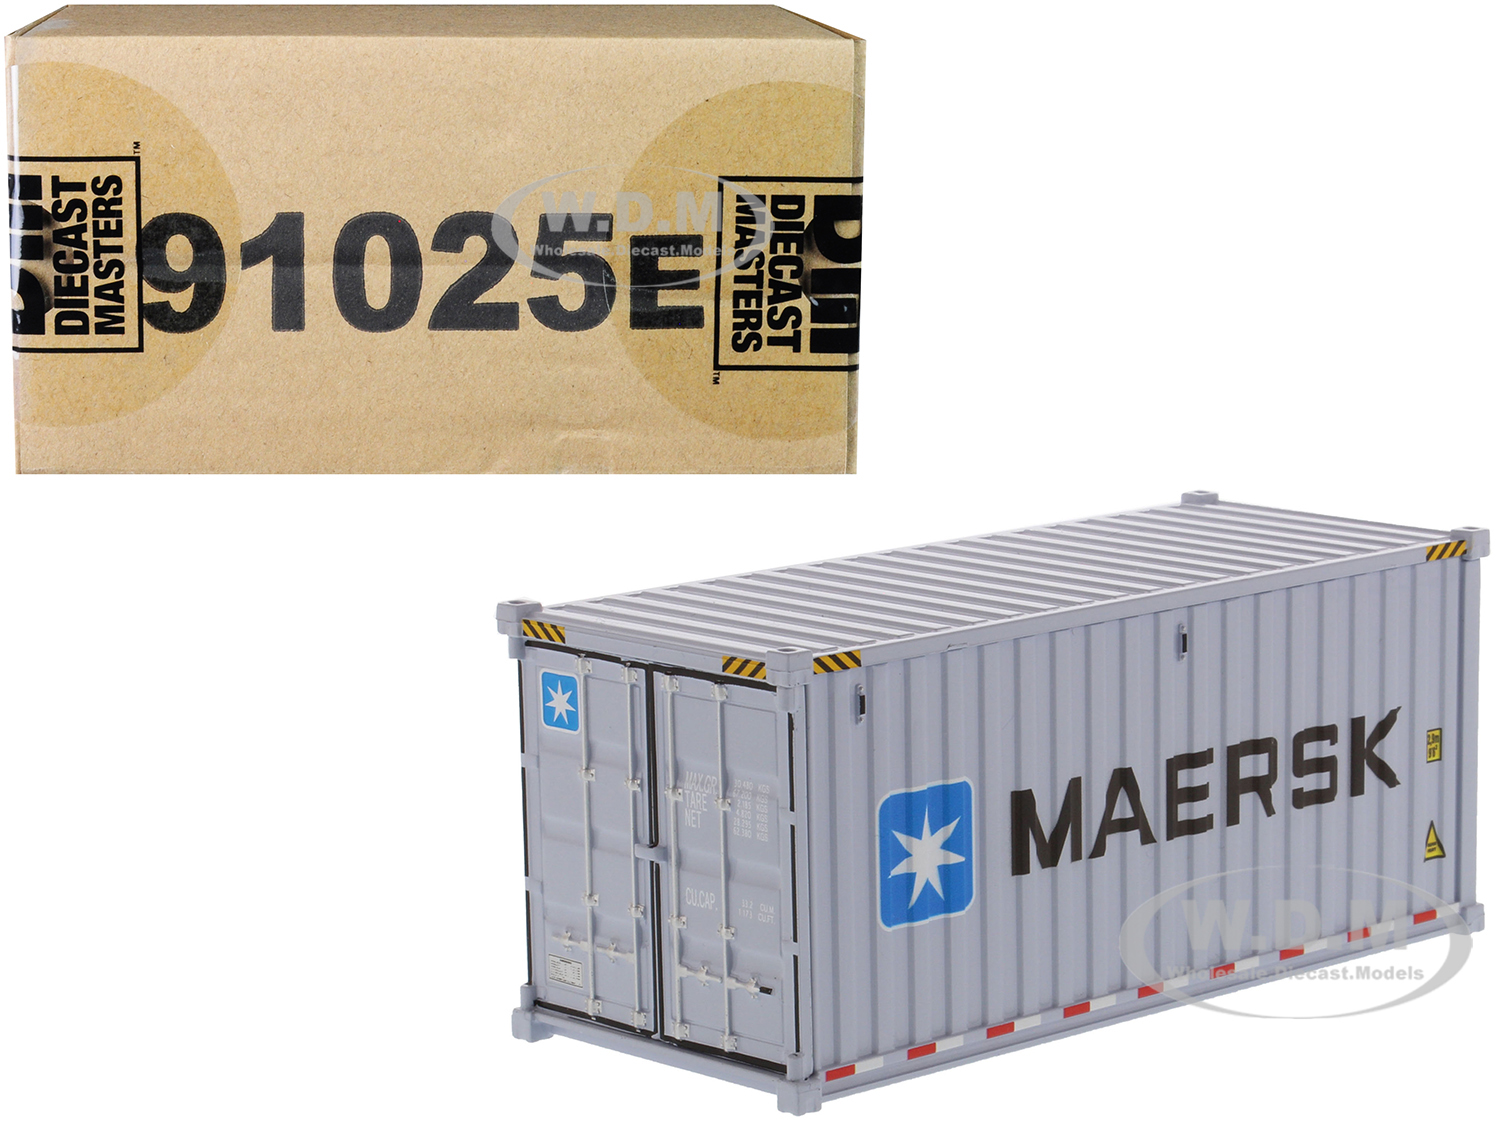 20 Dry Goods Sea Container "maersk" Gray "transport Series" 1/50 Model By Diecast Masters